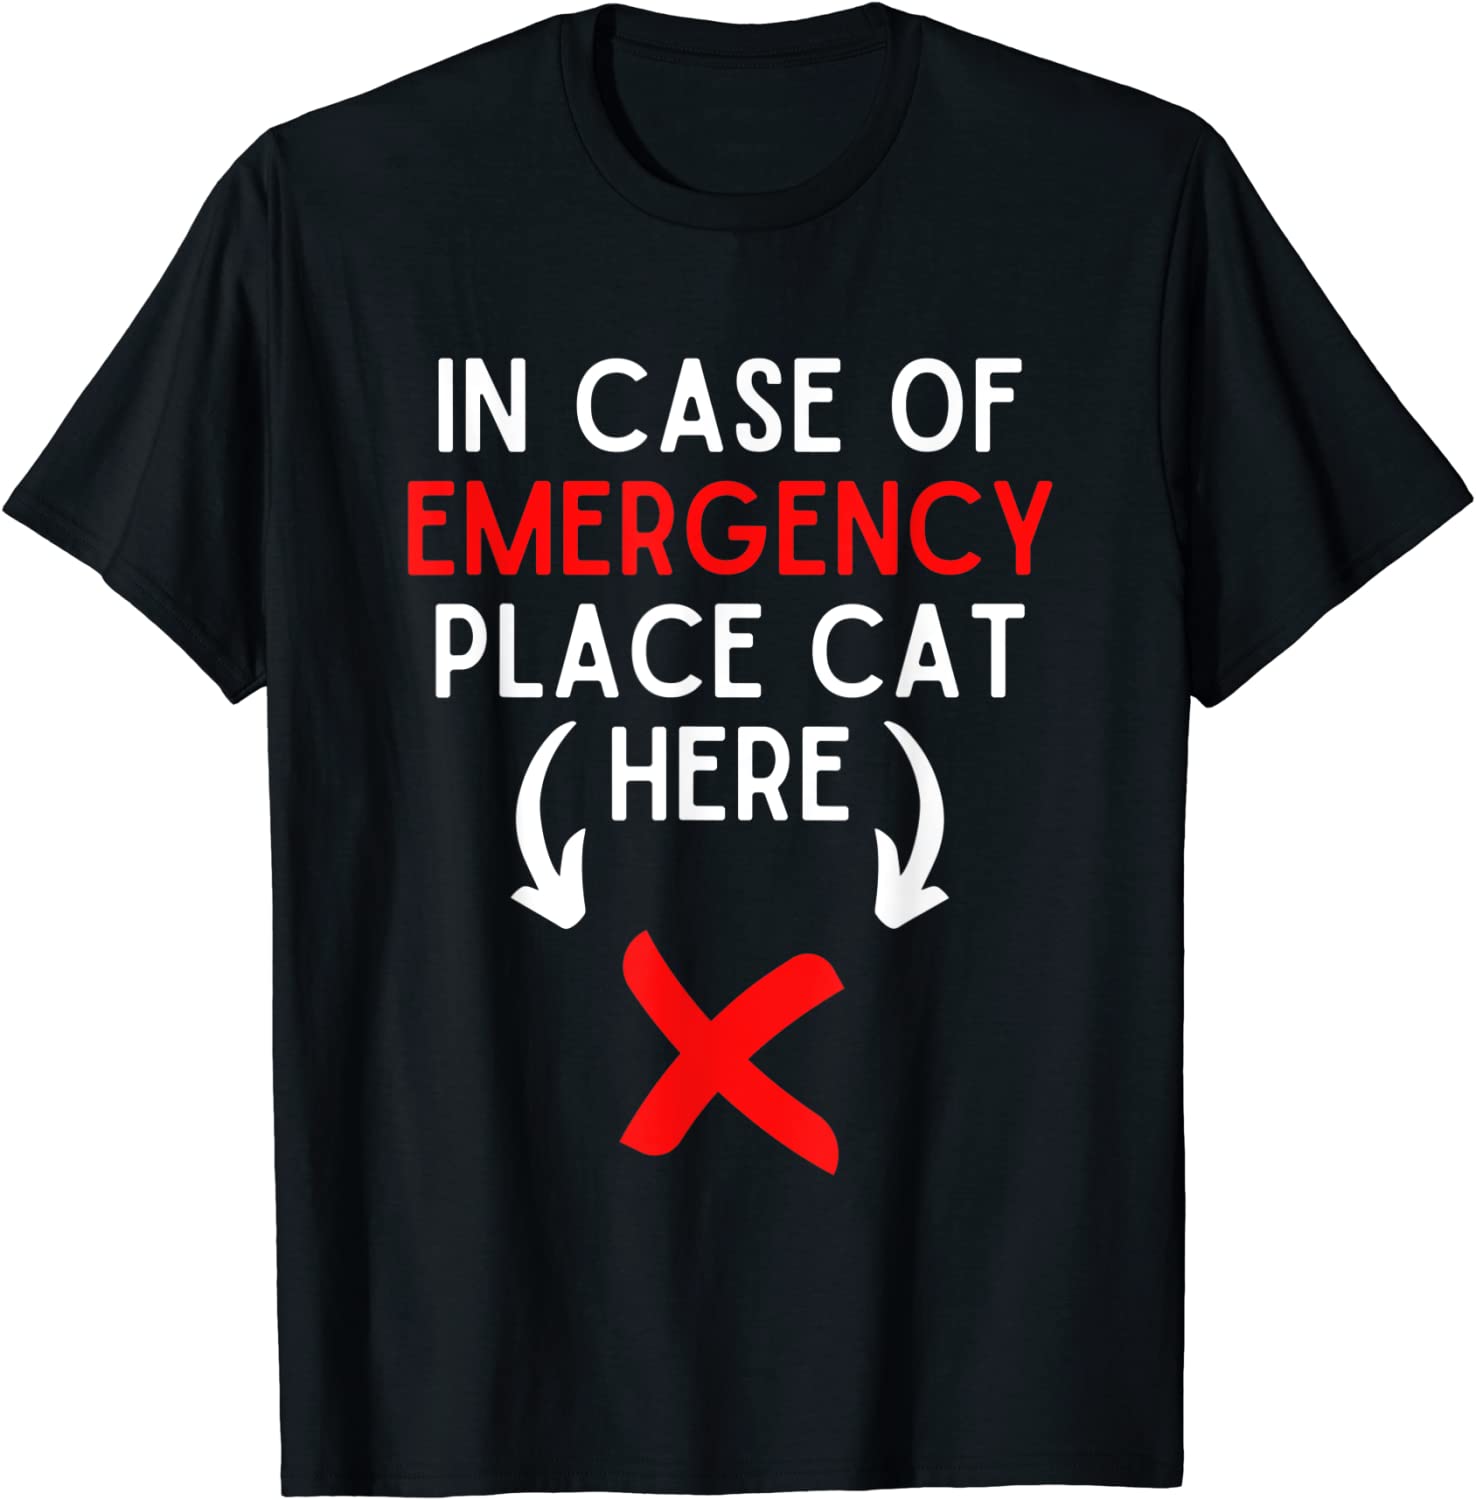 In Case of Emergency Place Cat Here T-Shirt - ShirtElephant Office